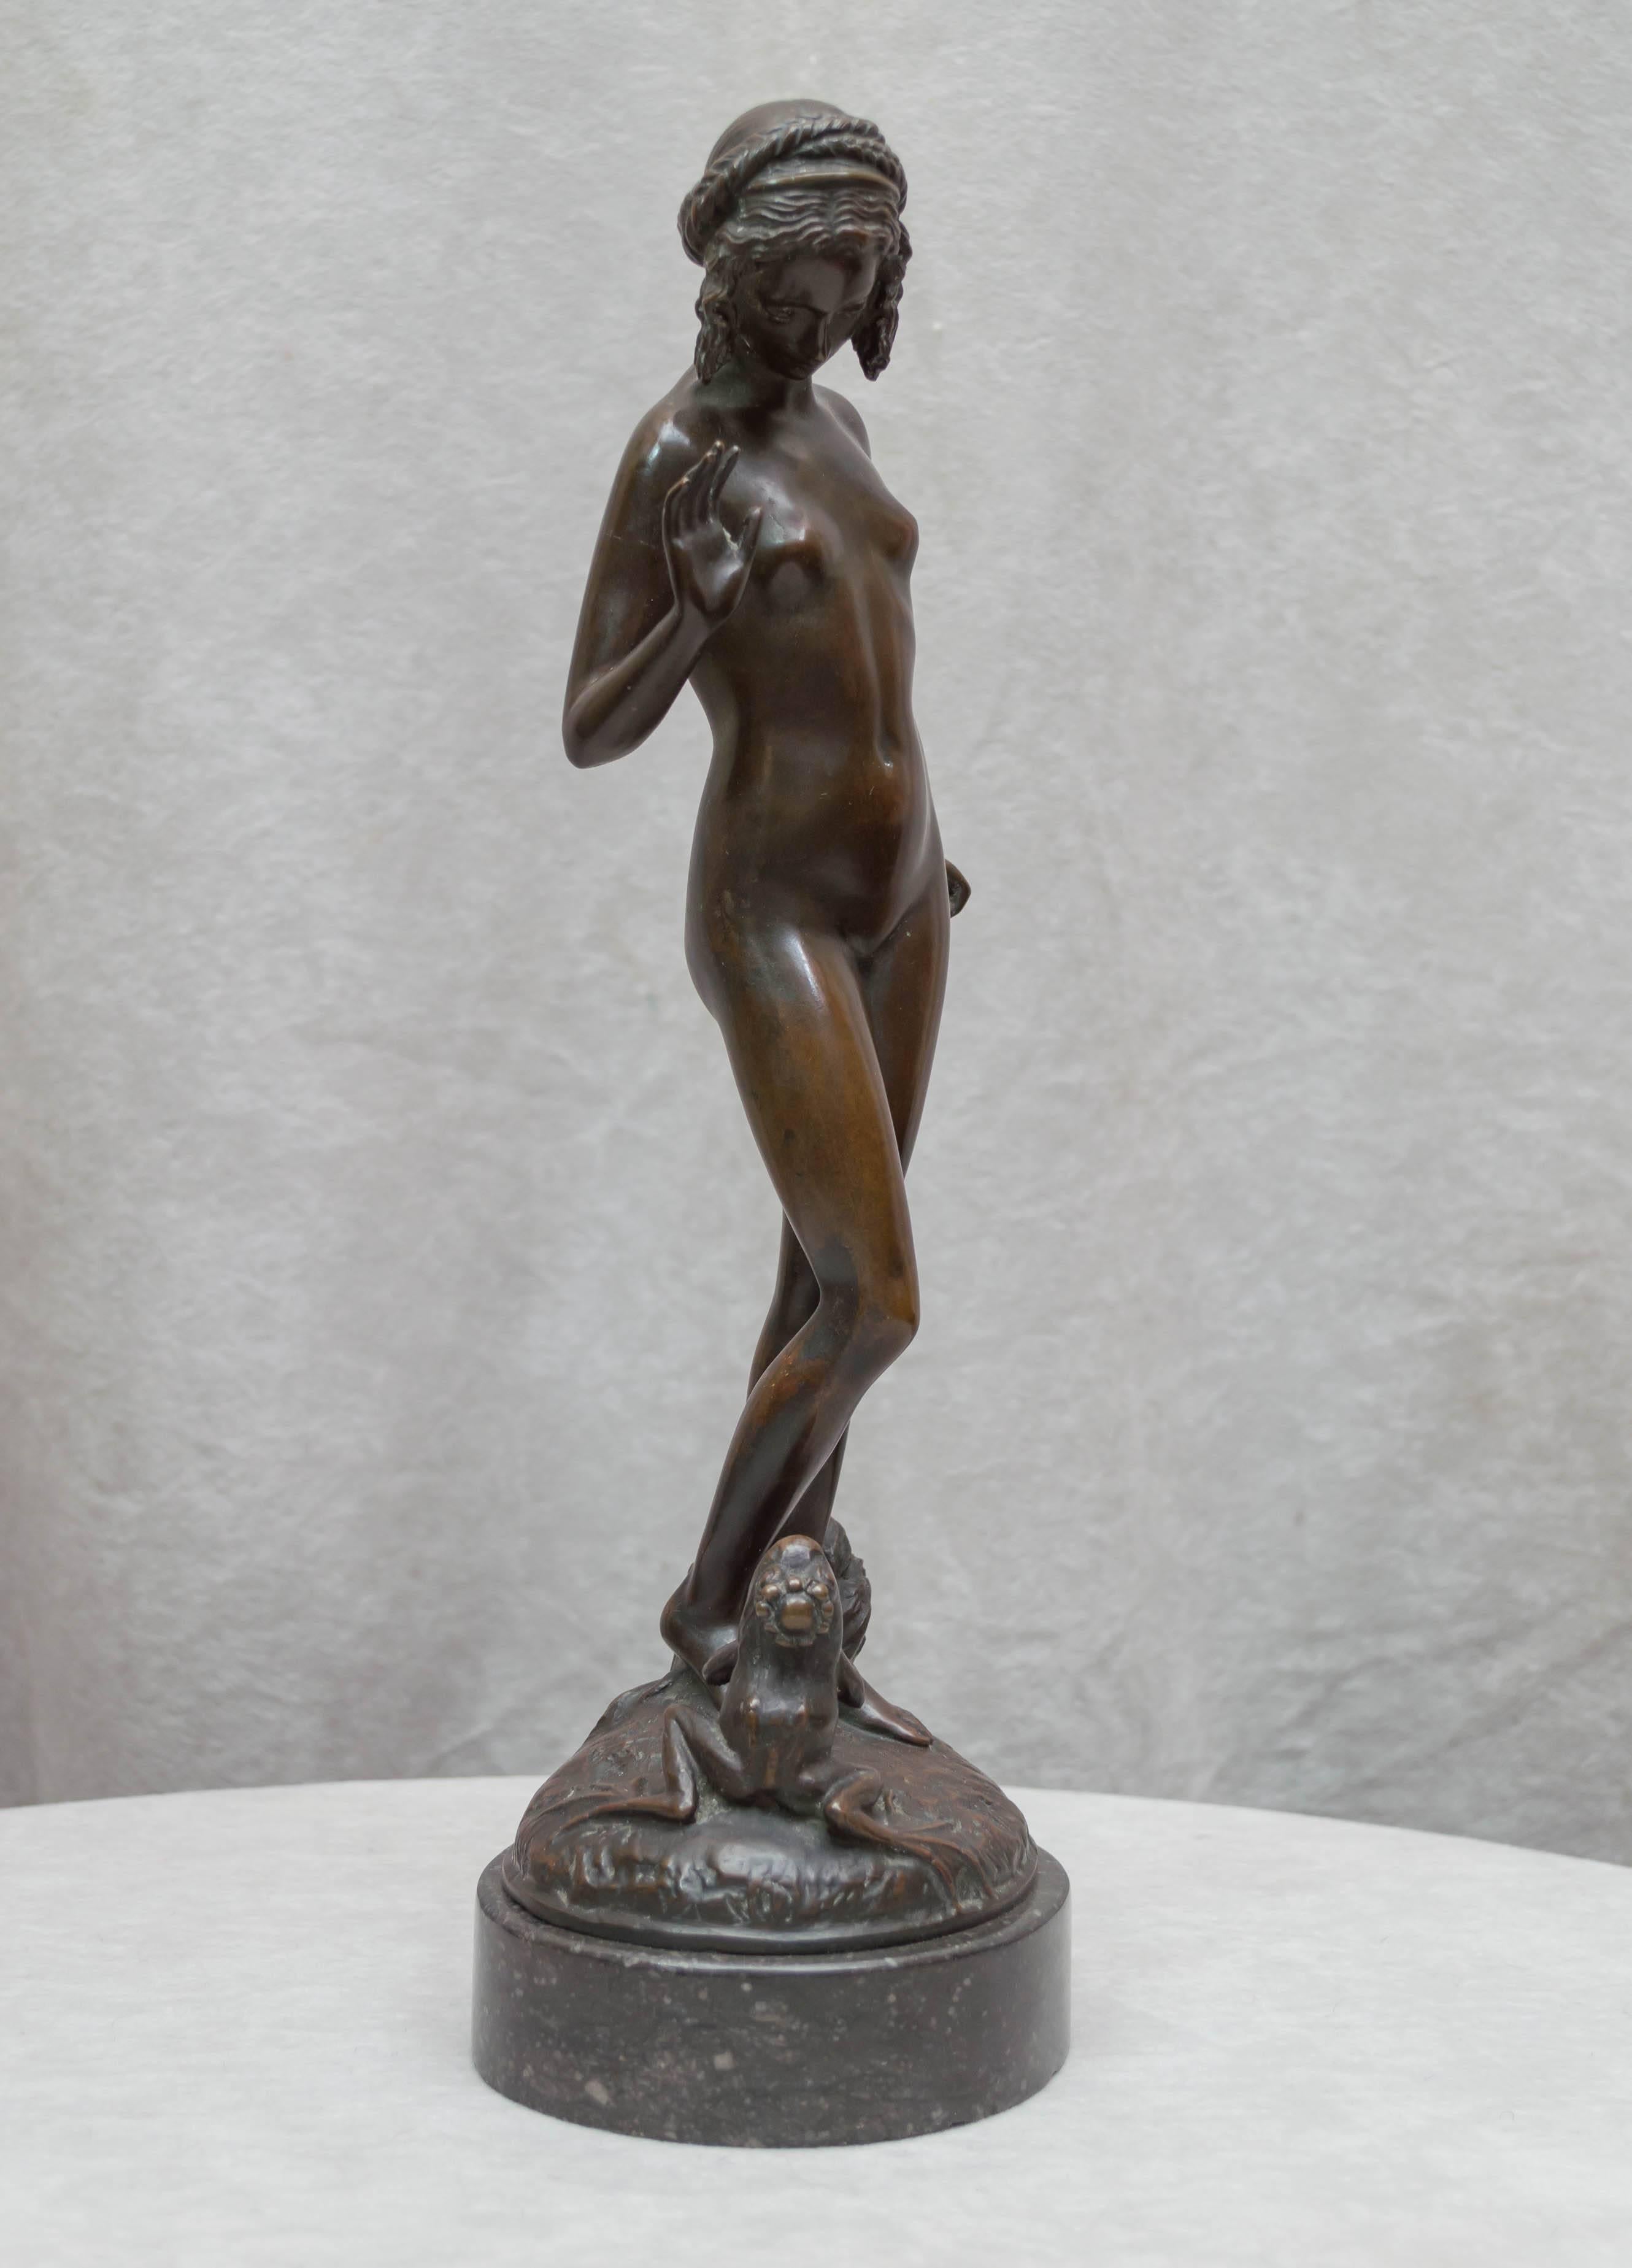 20th Century Allegorical Group of a Nude Maiden and a Frog Prince